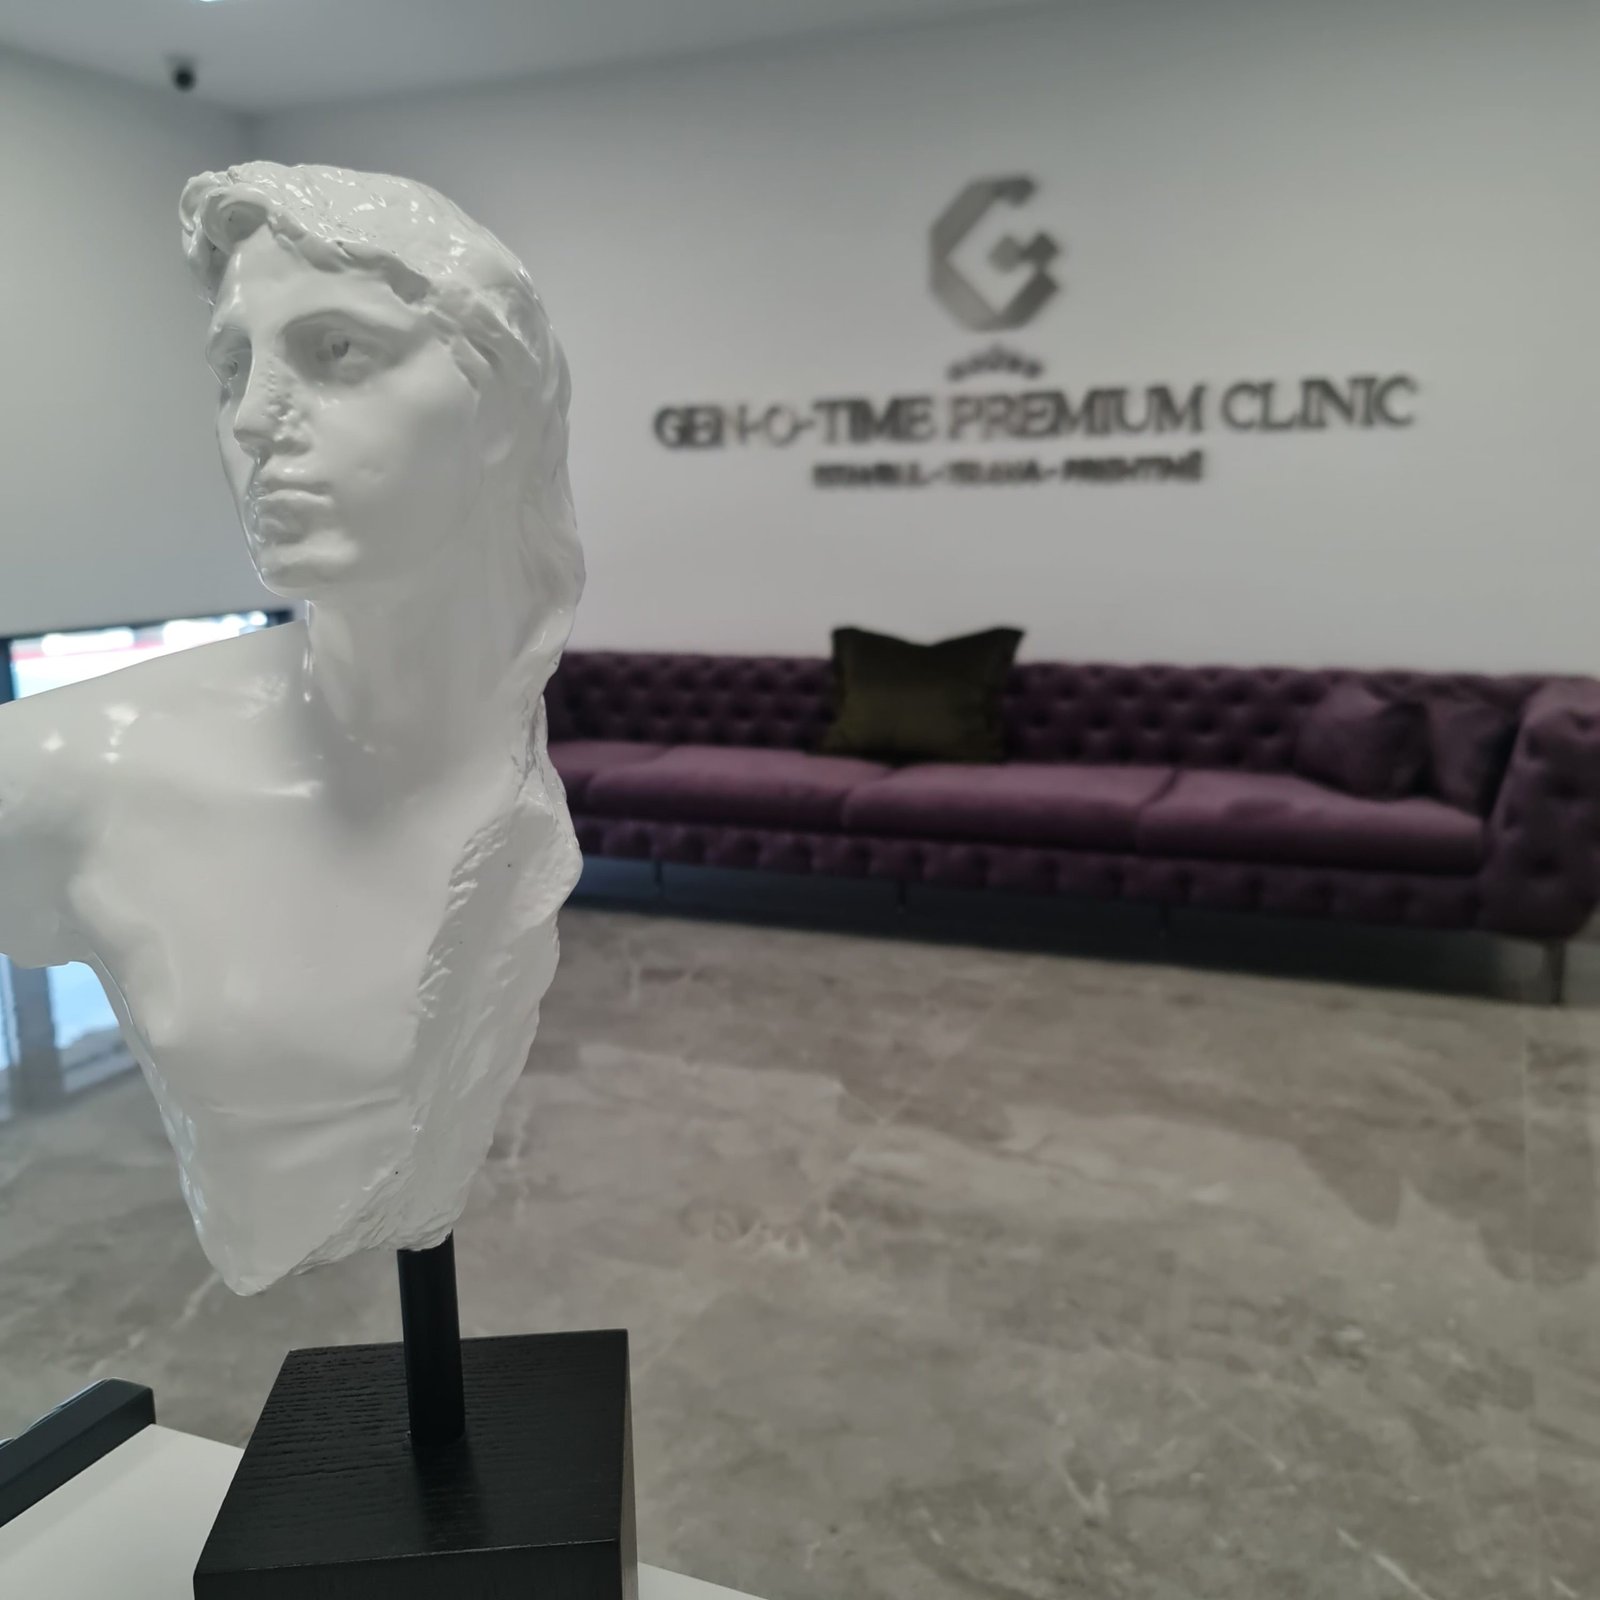 Breast Lifting - Gen-O-Time Premium Clinic